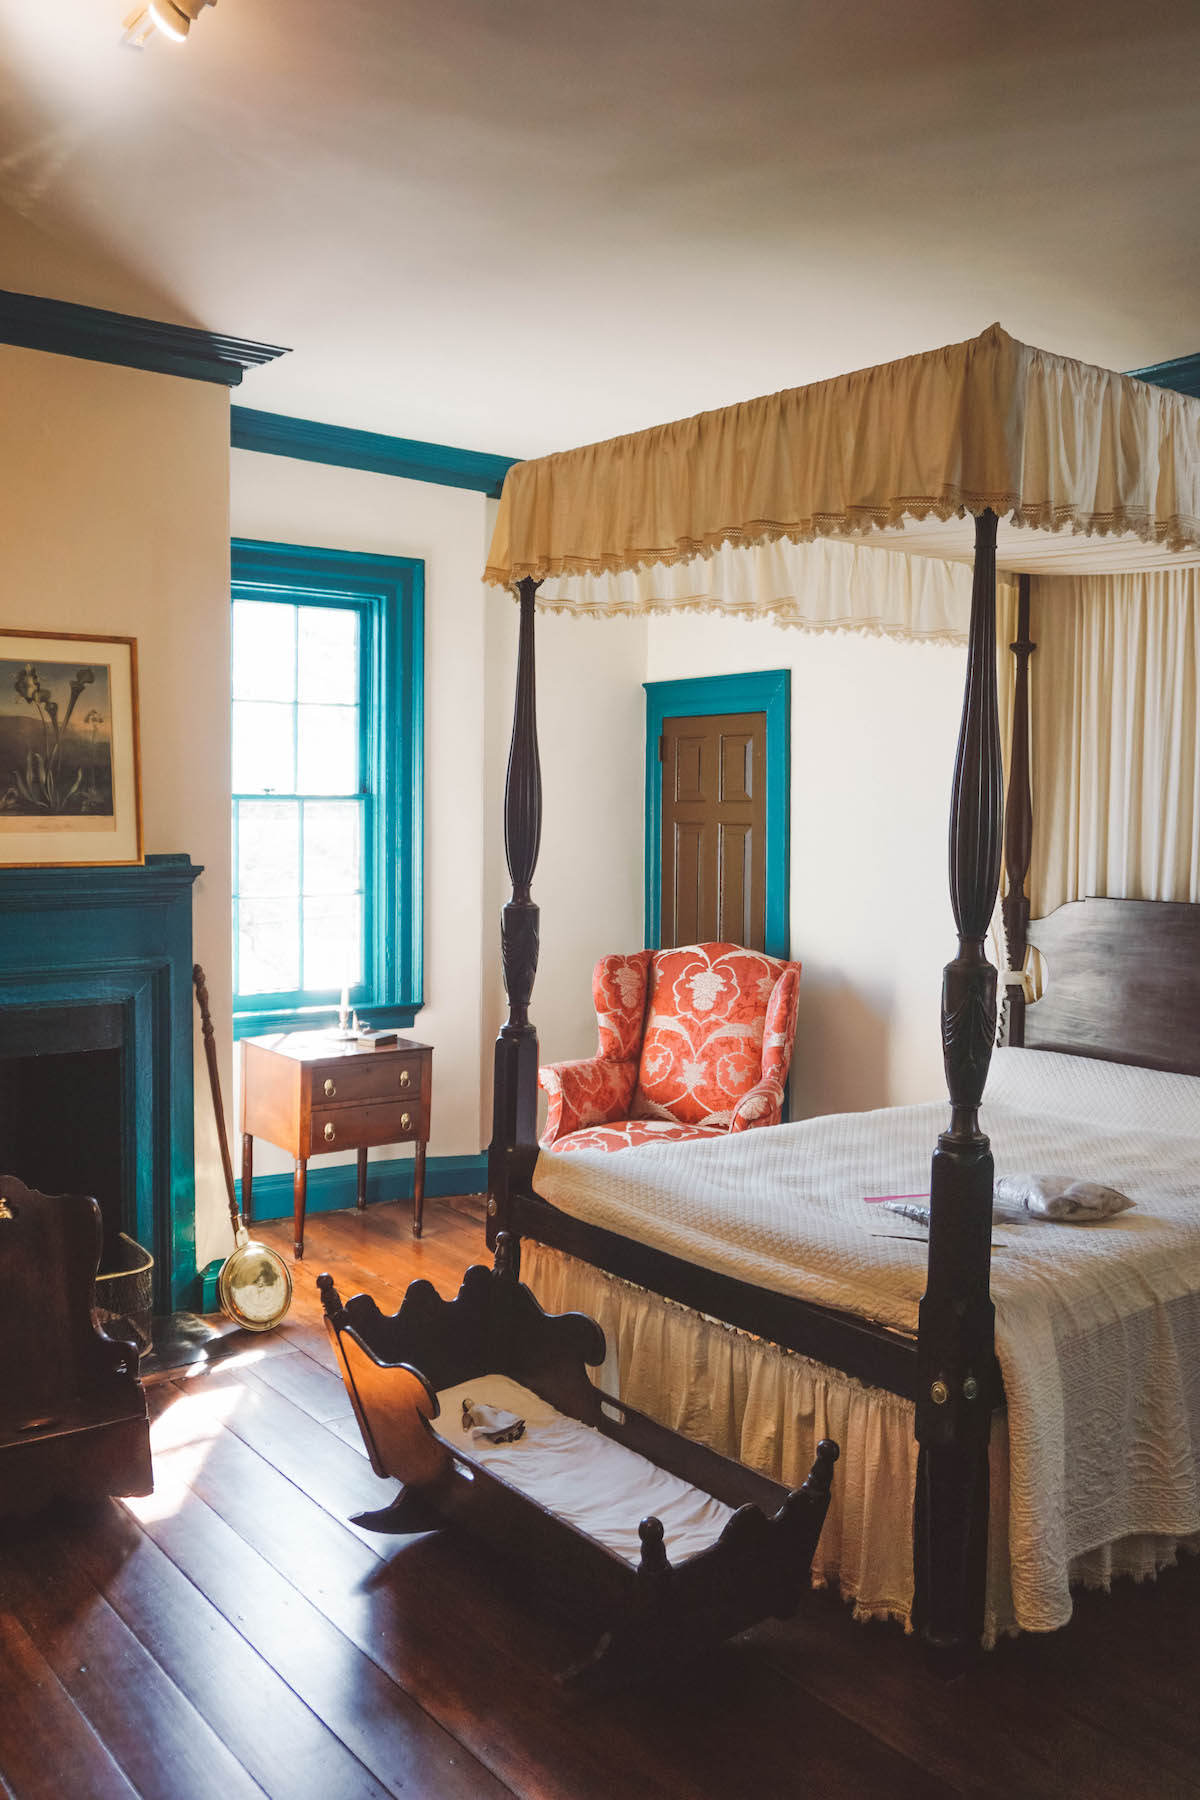 Inside a bedroom of the Burgwin-Wright House in Wilmington, NC.